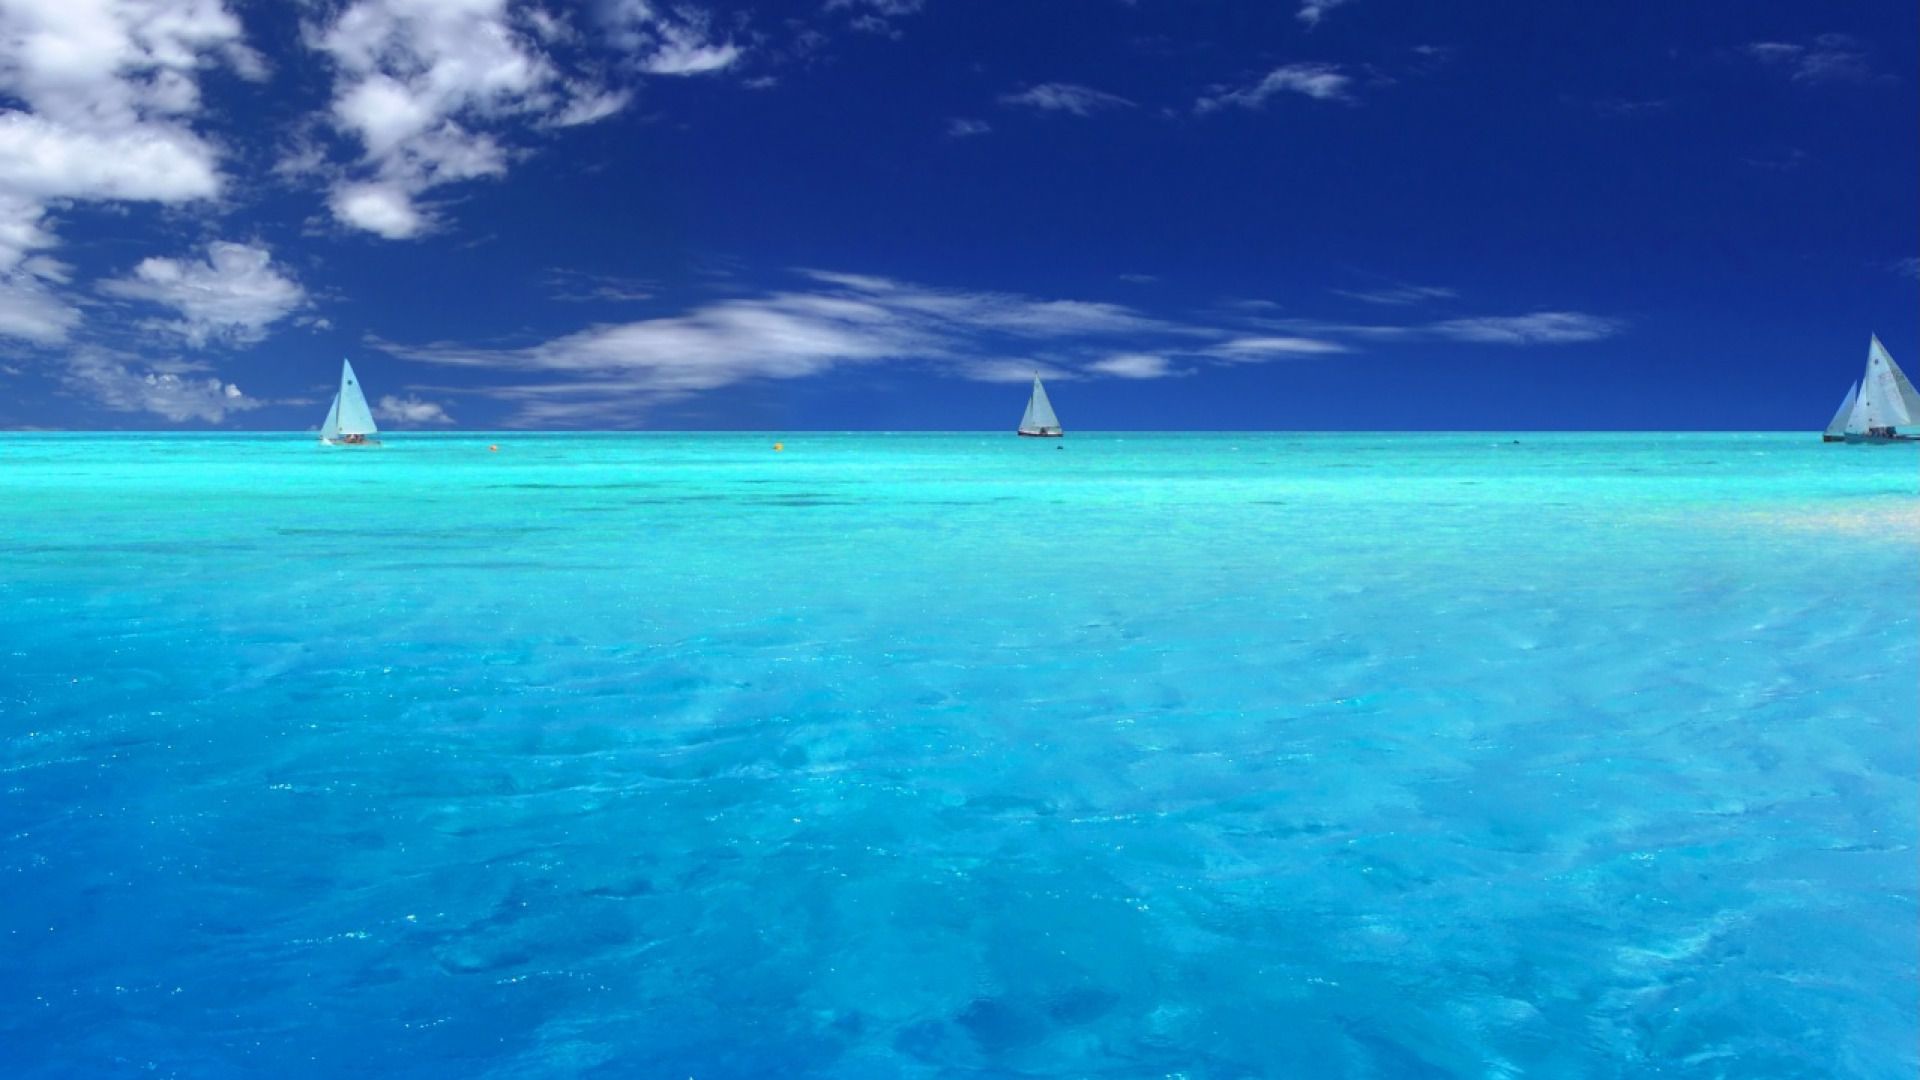 1920x1080 15 Free Ocean Wallpapers For Your Desktop Or Phone